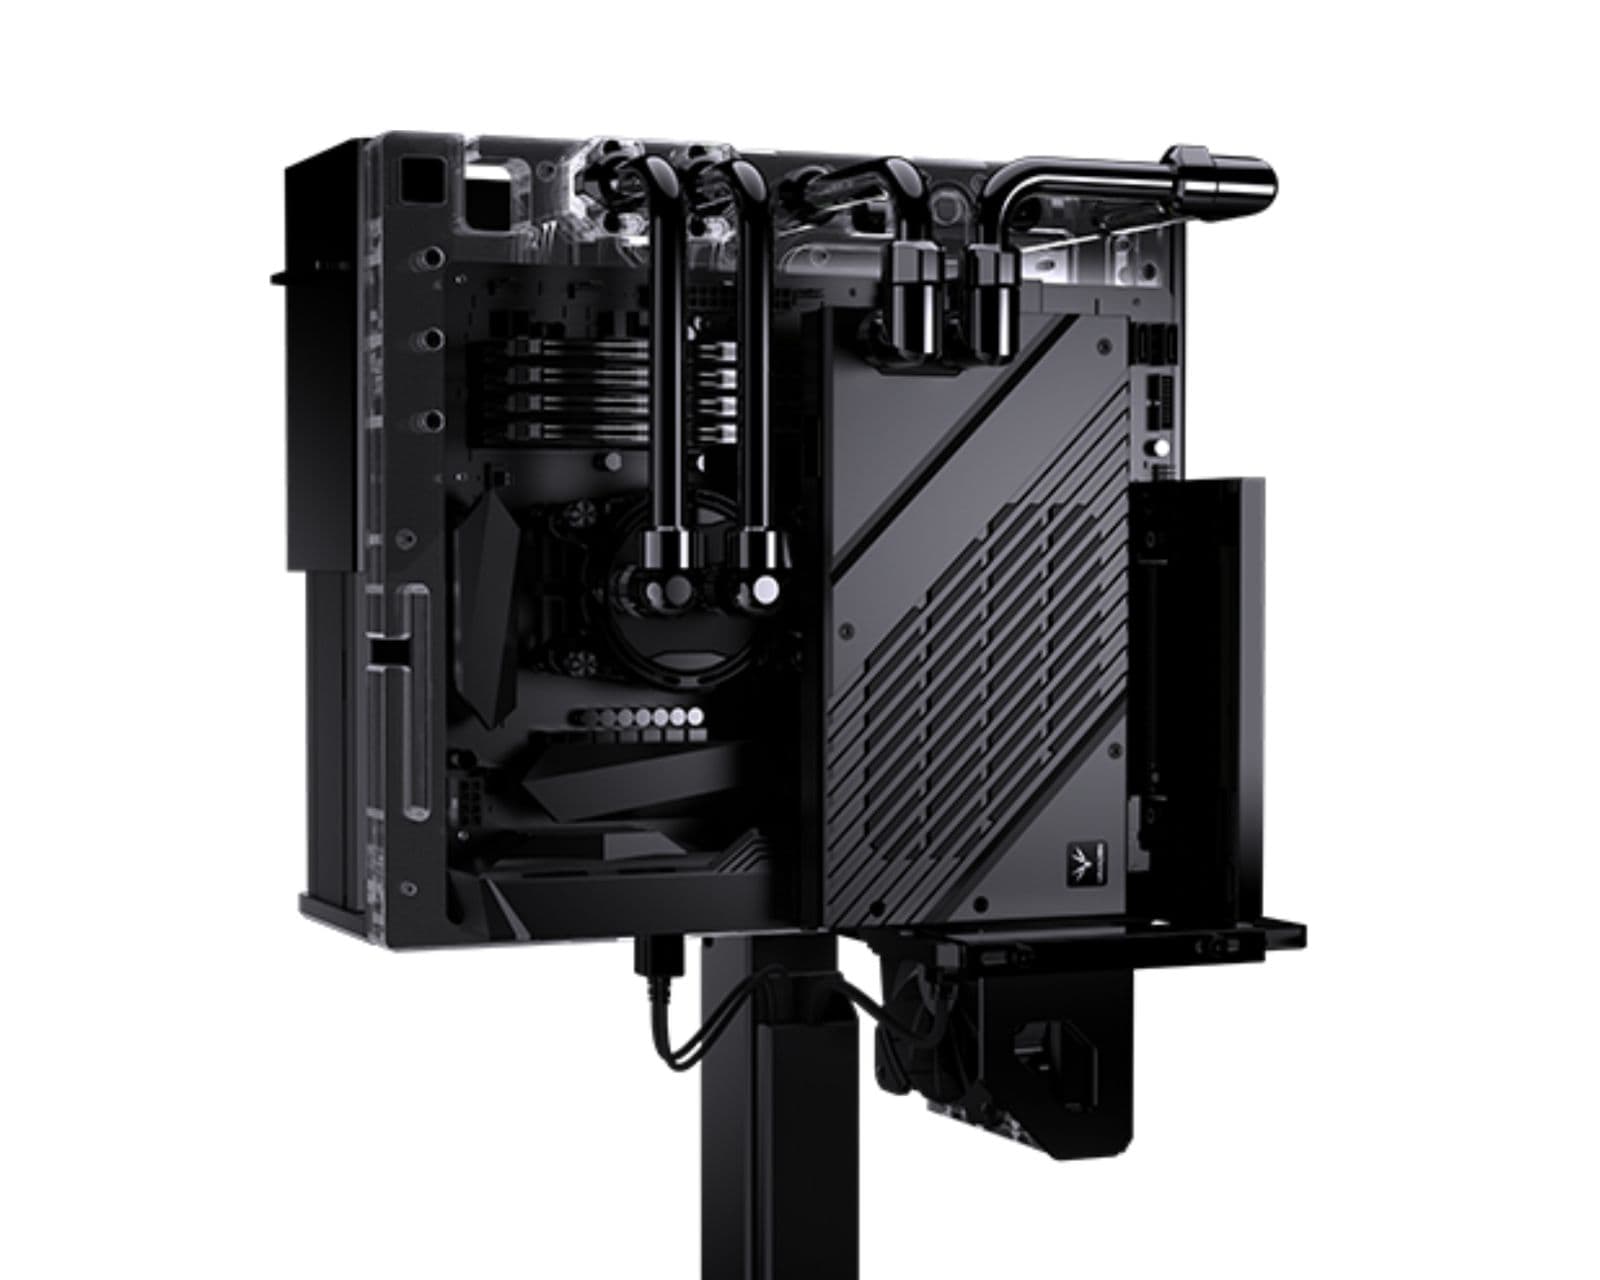 Granzon Full Armor GPU Water Block and Backplate For ASUS TUF Gaming GeForce RTX 4090 OG (GBN-AS4090TUFOG)